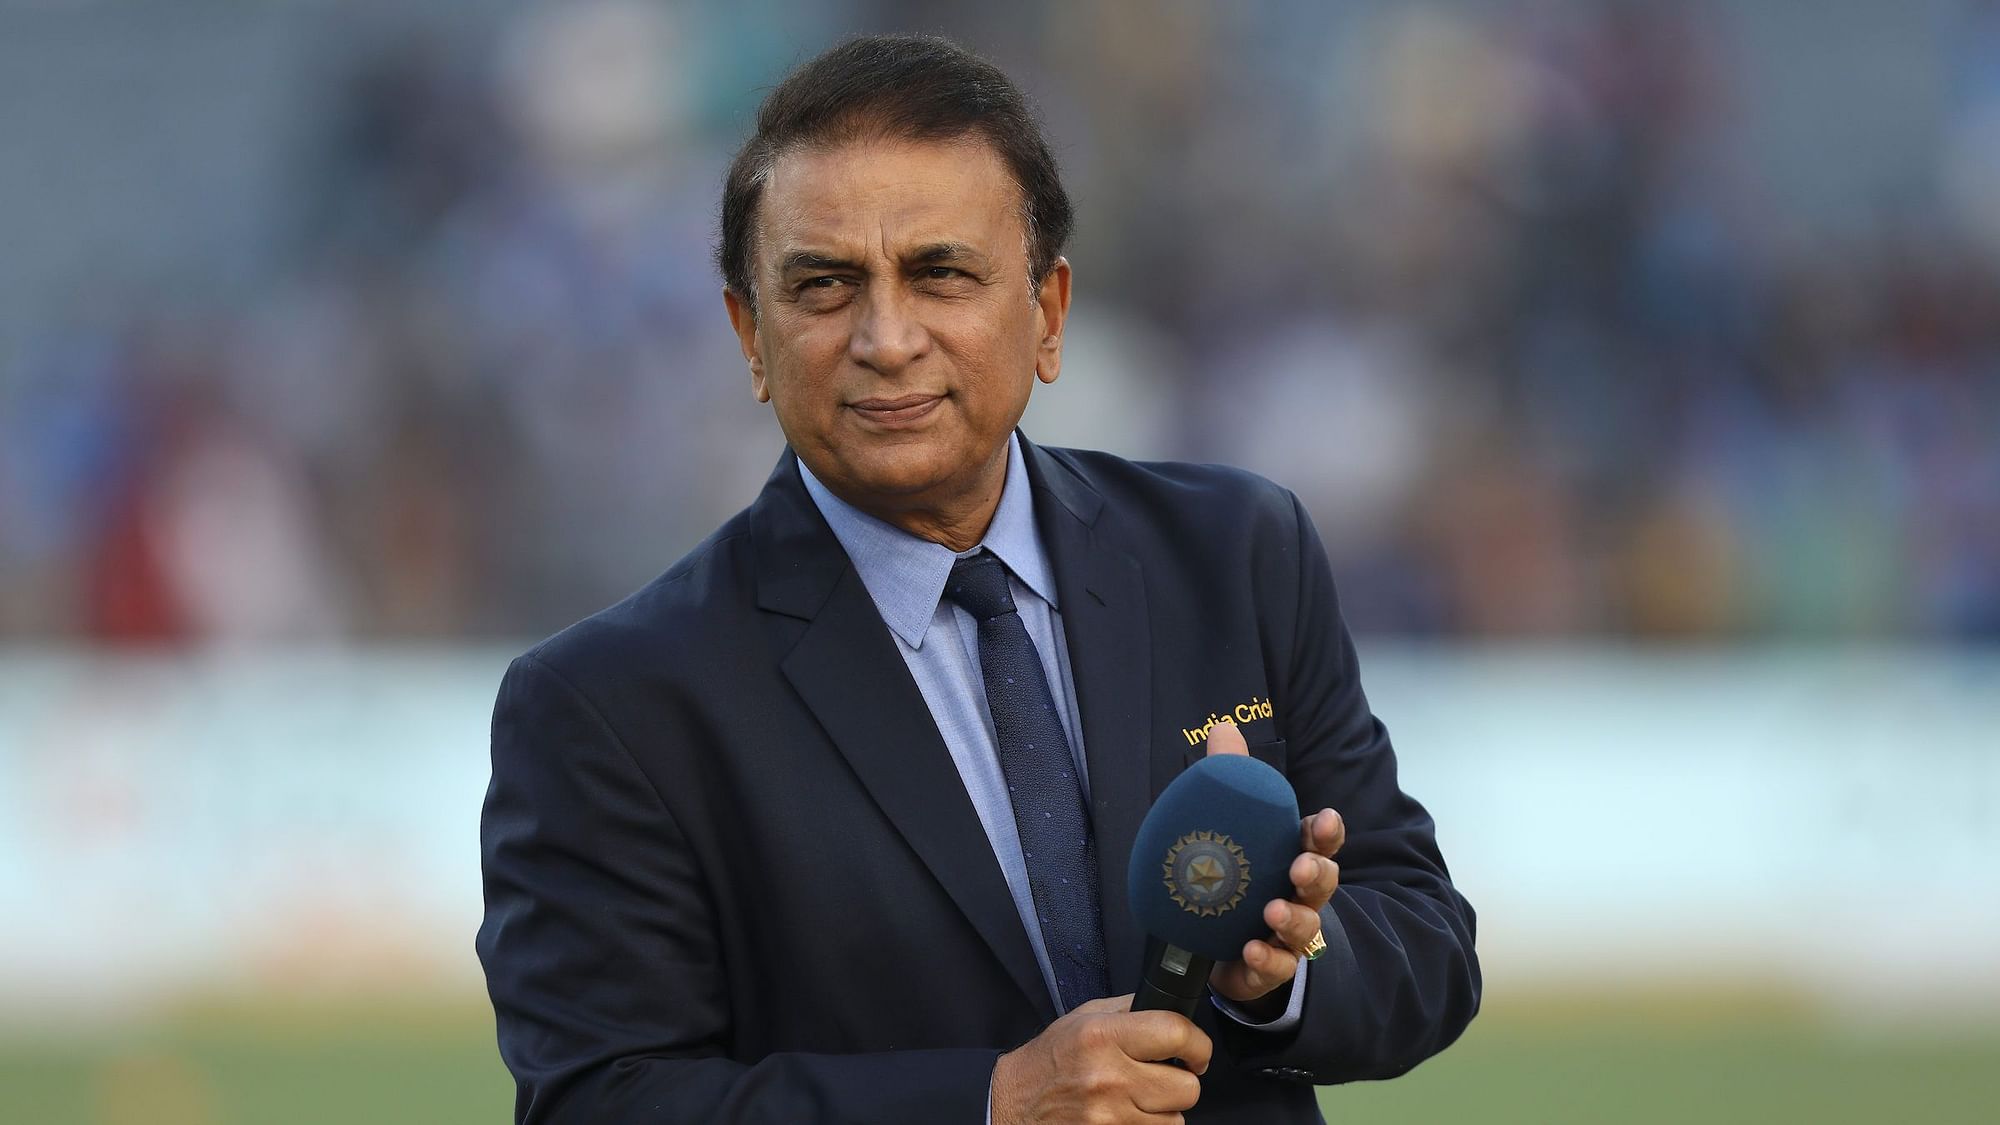 Gavaskar recalled an instance when he and Miandad pranked former Australian skipper Ian Chappell, who was a commentator in one of the matches.